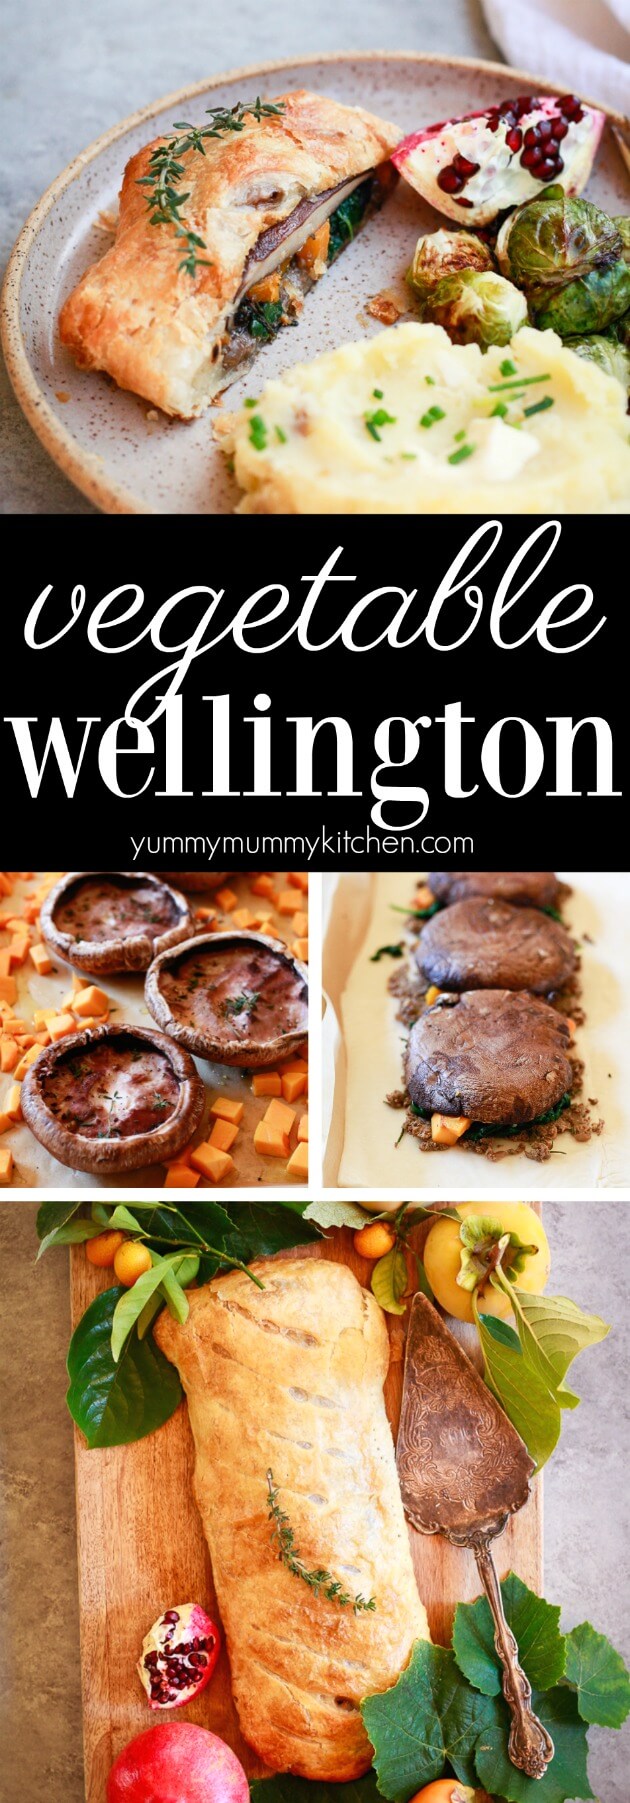 Vegetarian Wellington recipe filled with mushroom duxelles, portobello mushrooms, butternut squash, and spinach is perfect for a vegan Thanksgiving or Christmas dinner. #vegetarian #vegan #Thanksgiving #Chrsitmas #dinner